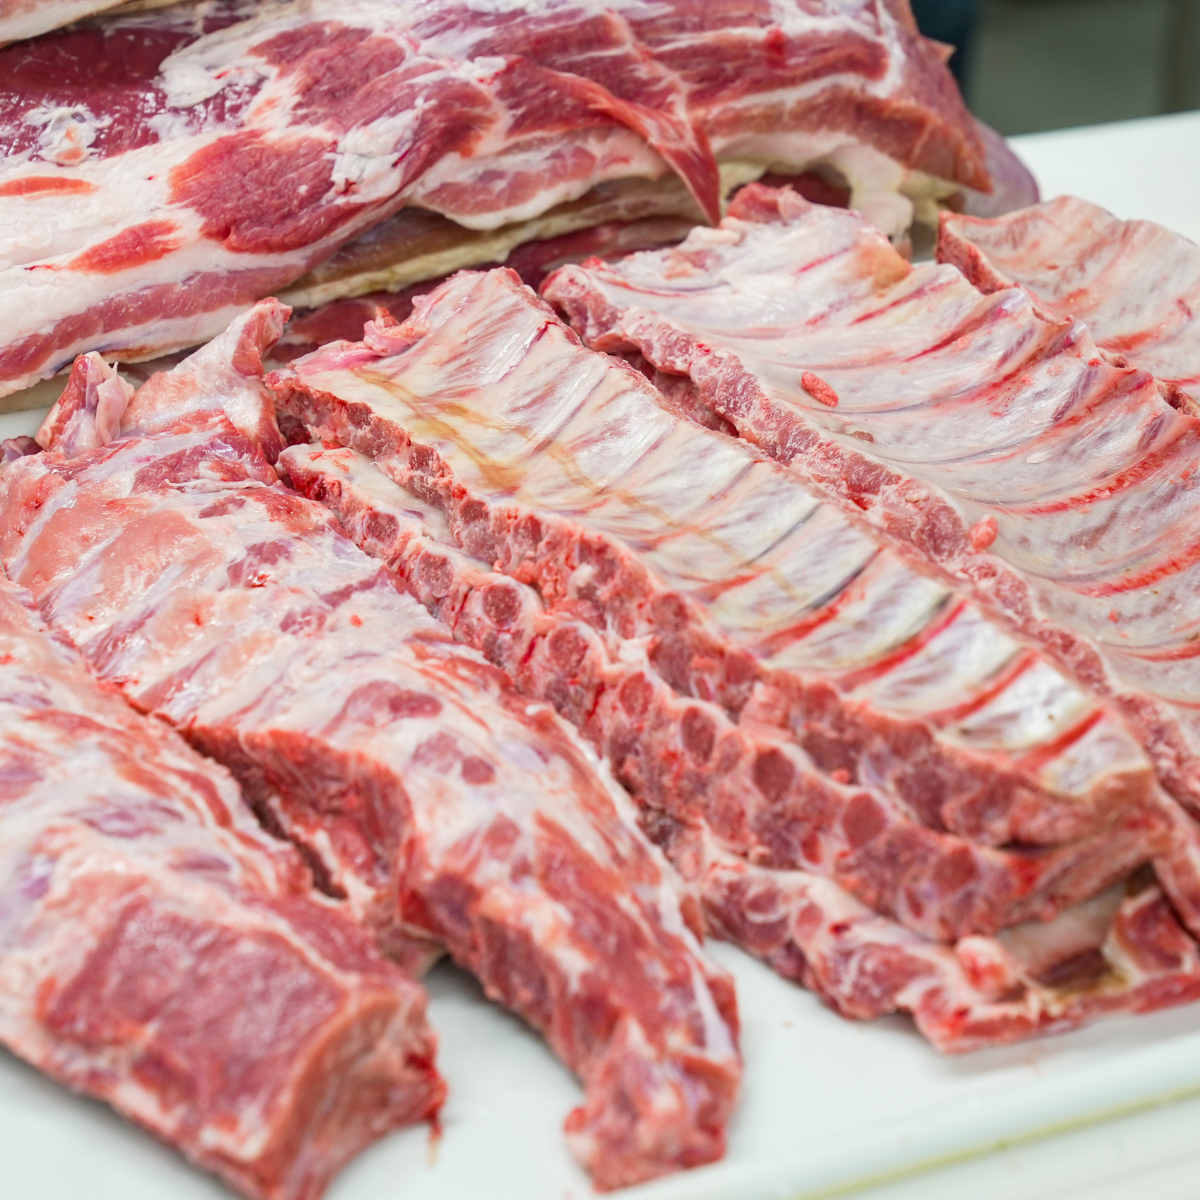 How Many Ribs Does a Cow Have? – Your Beef Rib Guide